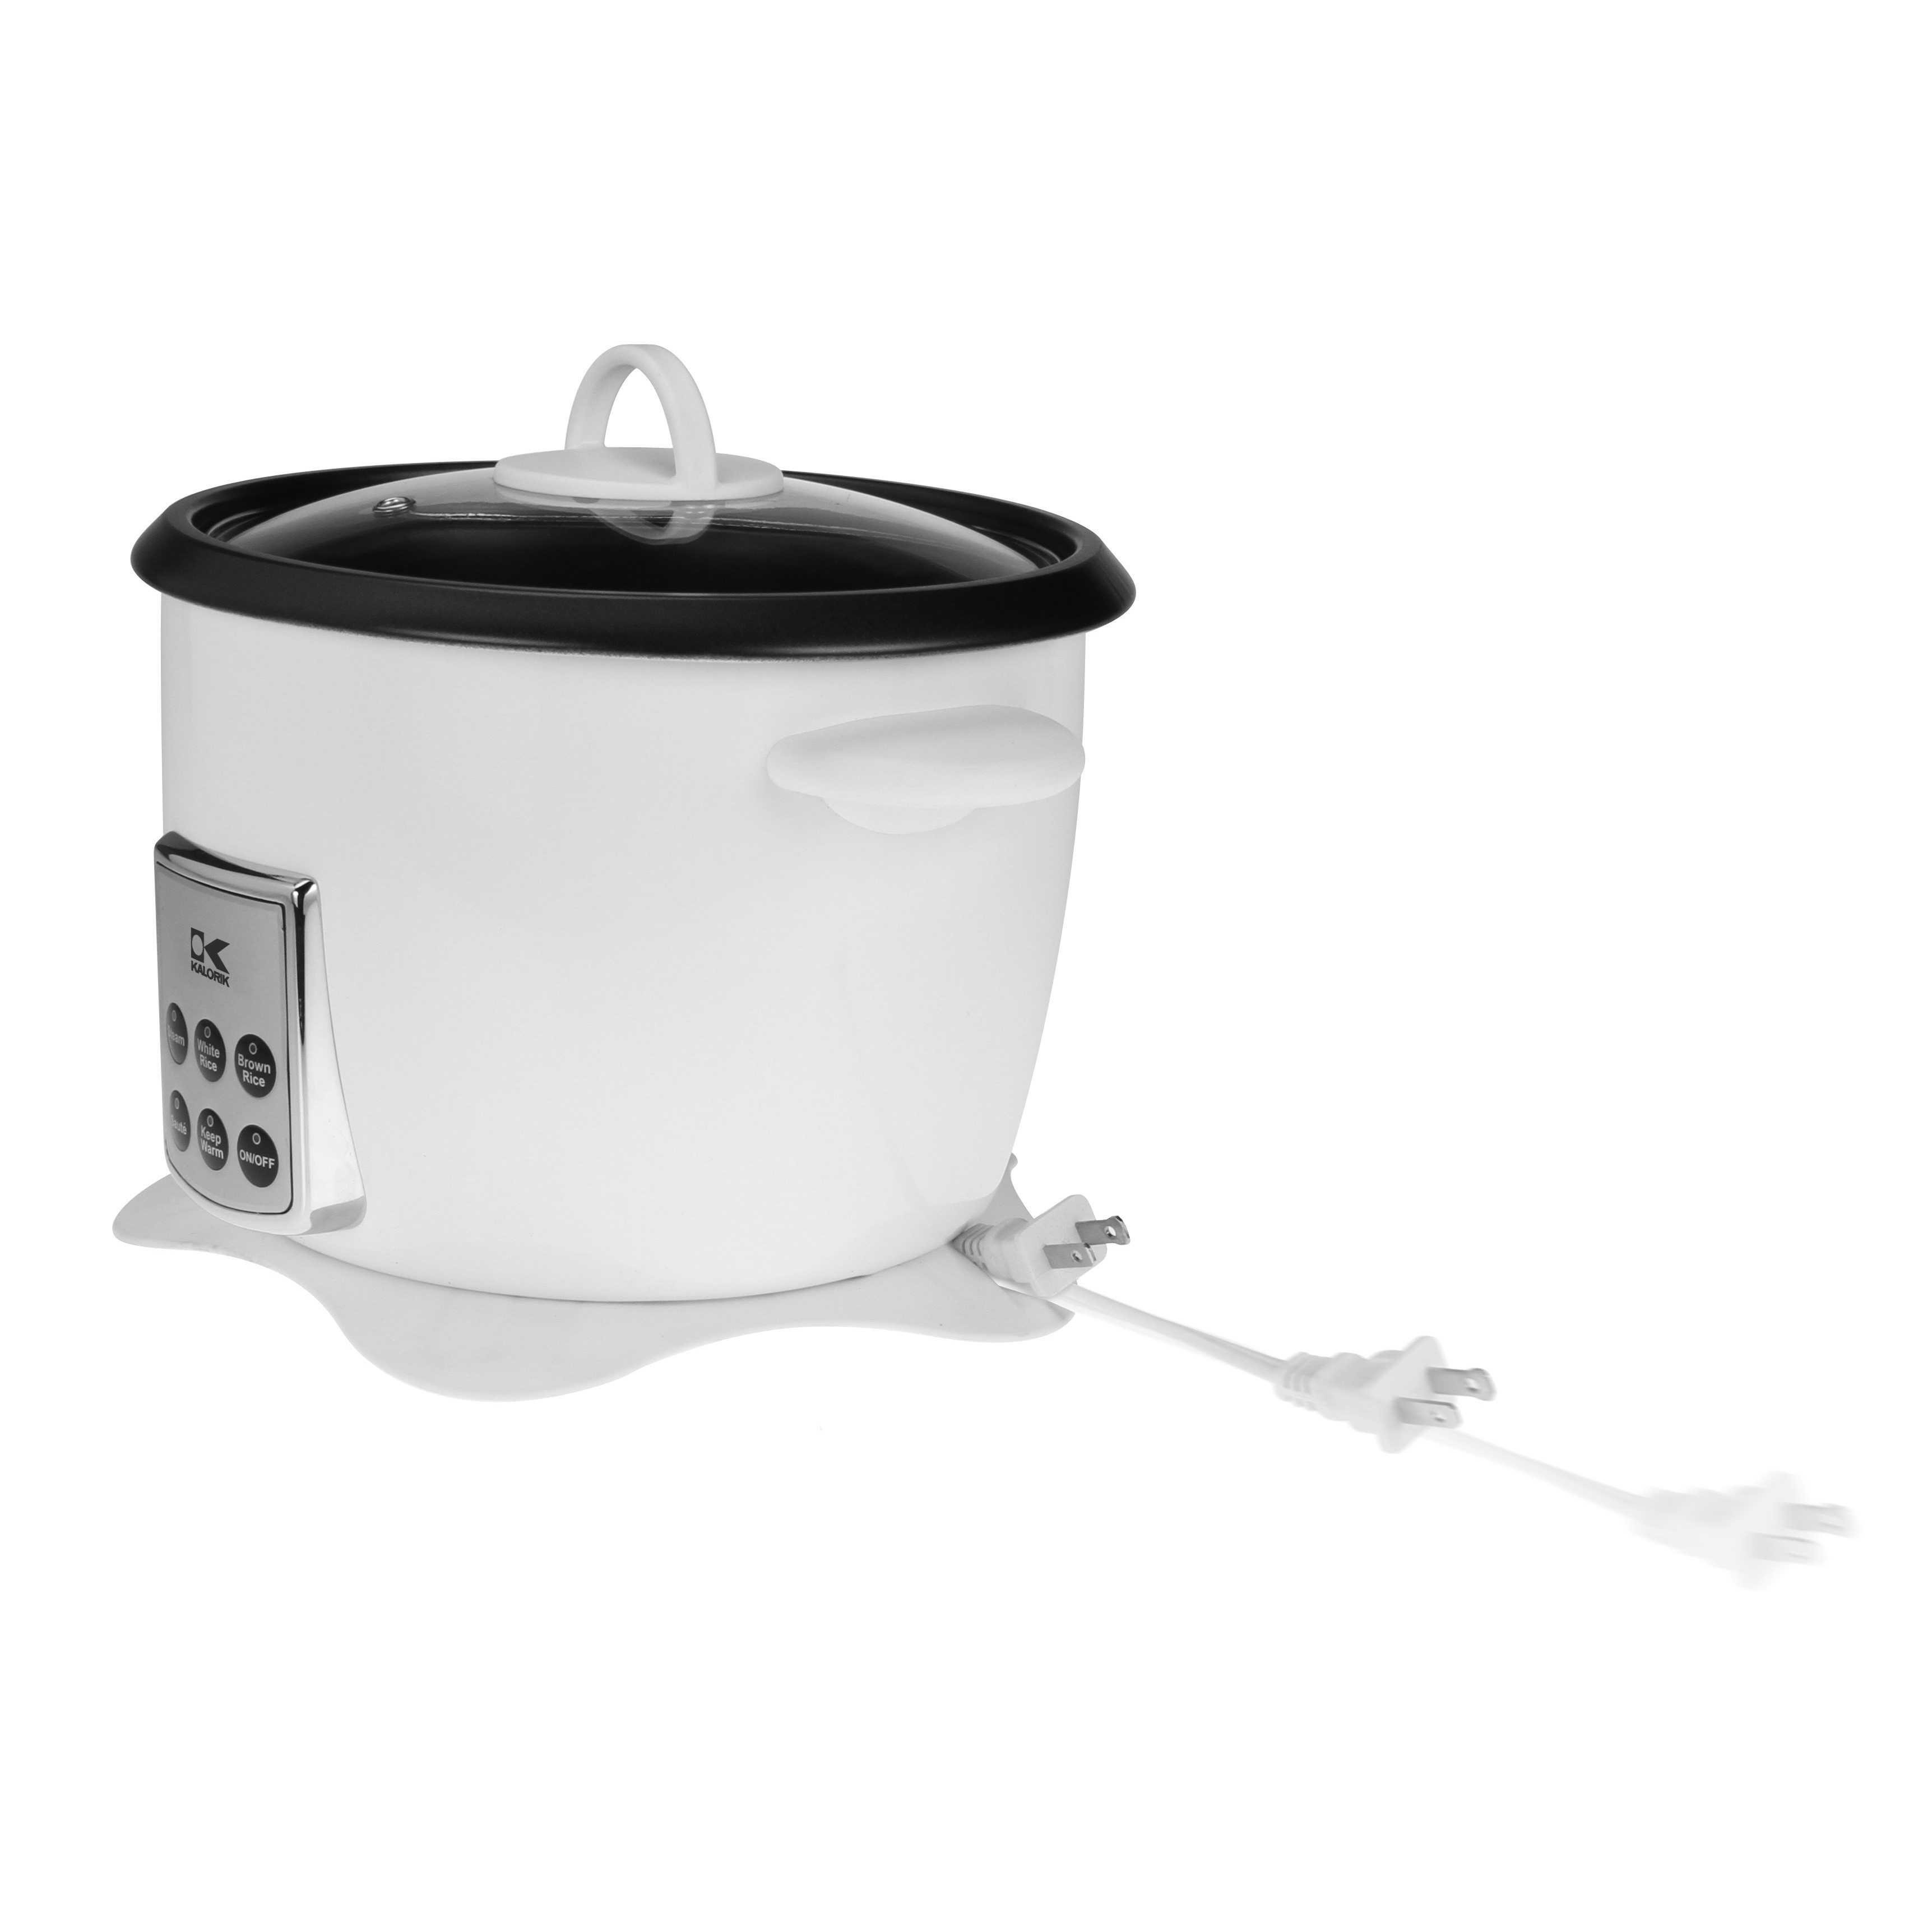 Kitch'n'Stuff - Bluesky Delight Rice Cooker 4.5 Lt Close Lid Cooking  Capacity :: ( 18 - 22 Persons ) Presenting an exciting range of electric rice  cookers that not only cooks rice